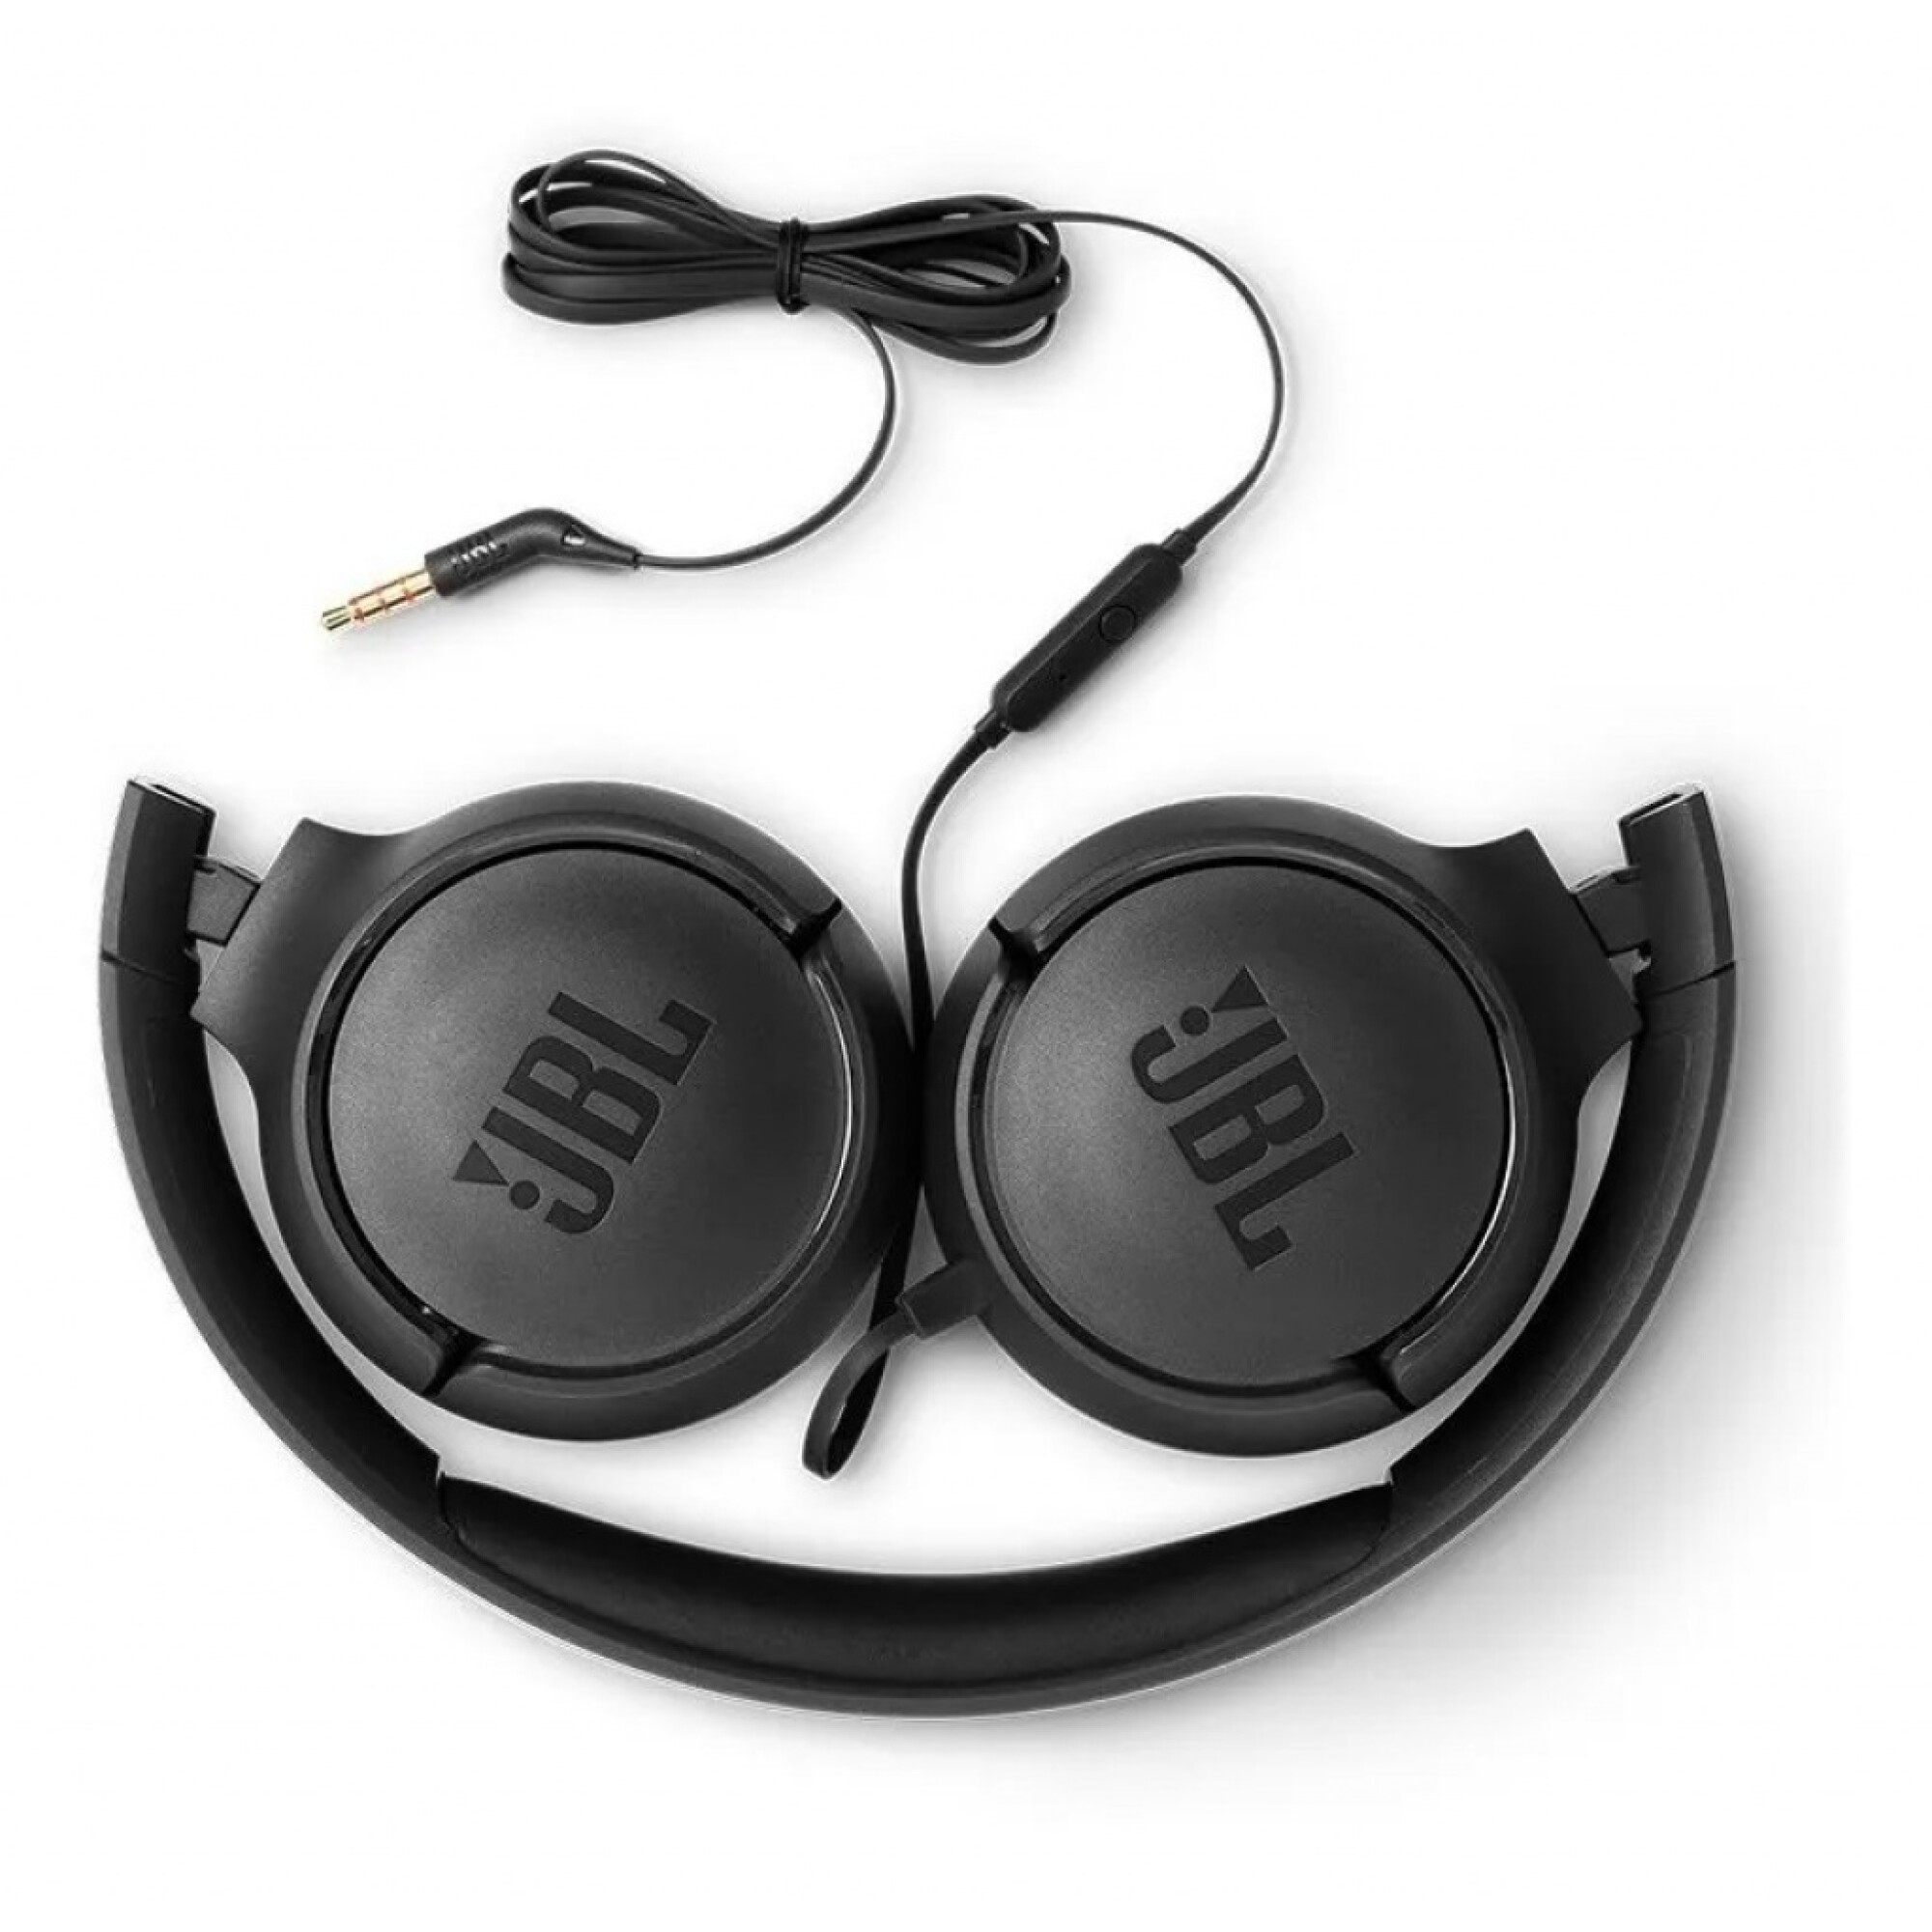 AURICULARES JBL T500 CON CABLE NEGROS — Woofer